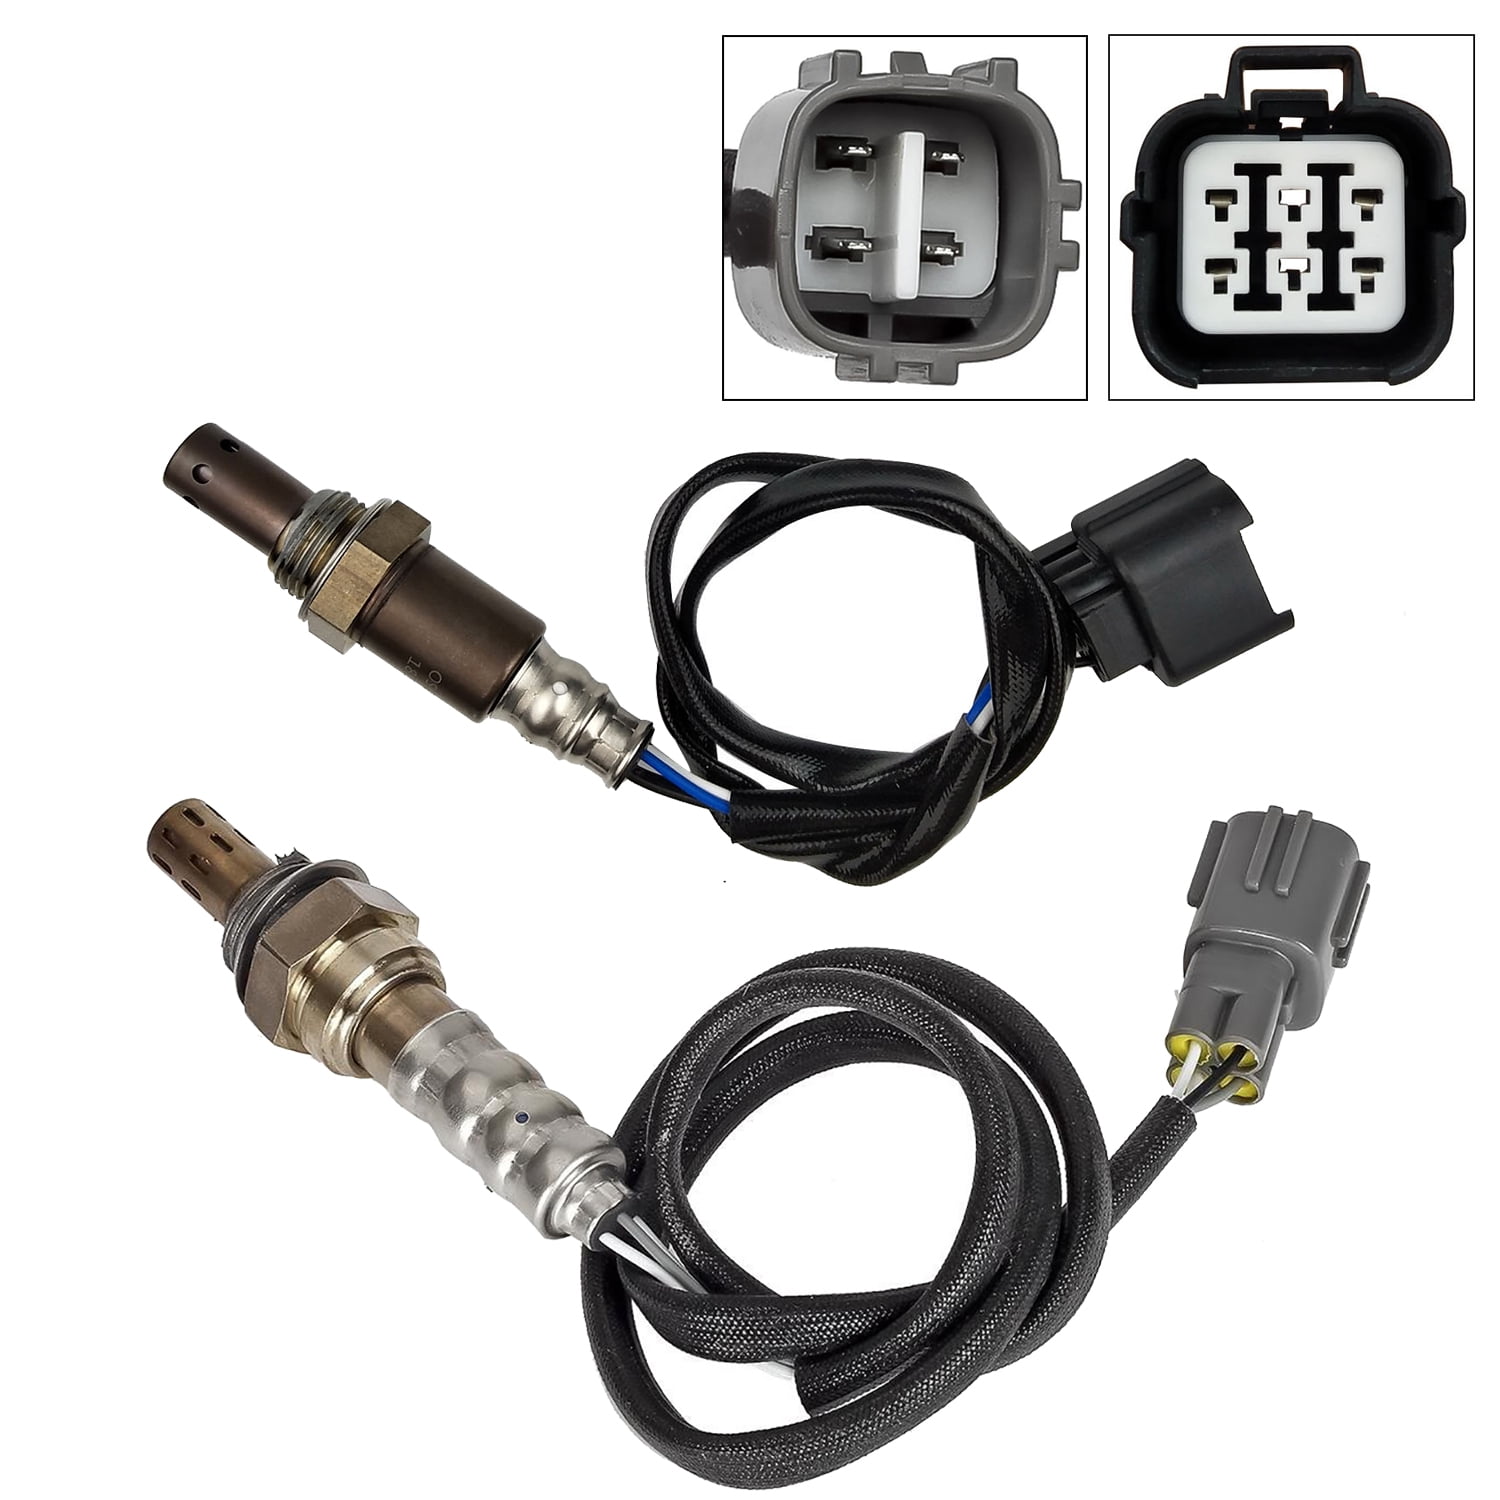 MAXFAVOR 2Pcs O2 Oxygen Sensor 234-9123 234-4445 Upstream and Downstream Replacement for Subaru Forester Saab 9-2X 2.5L 